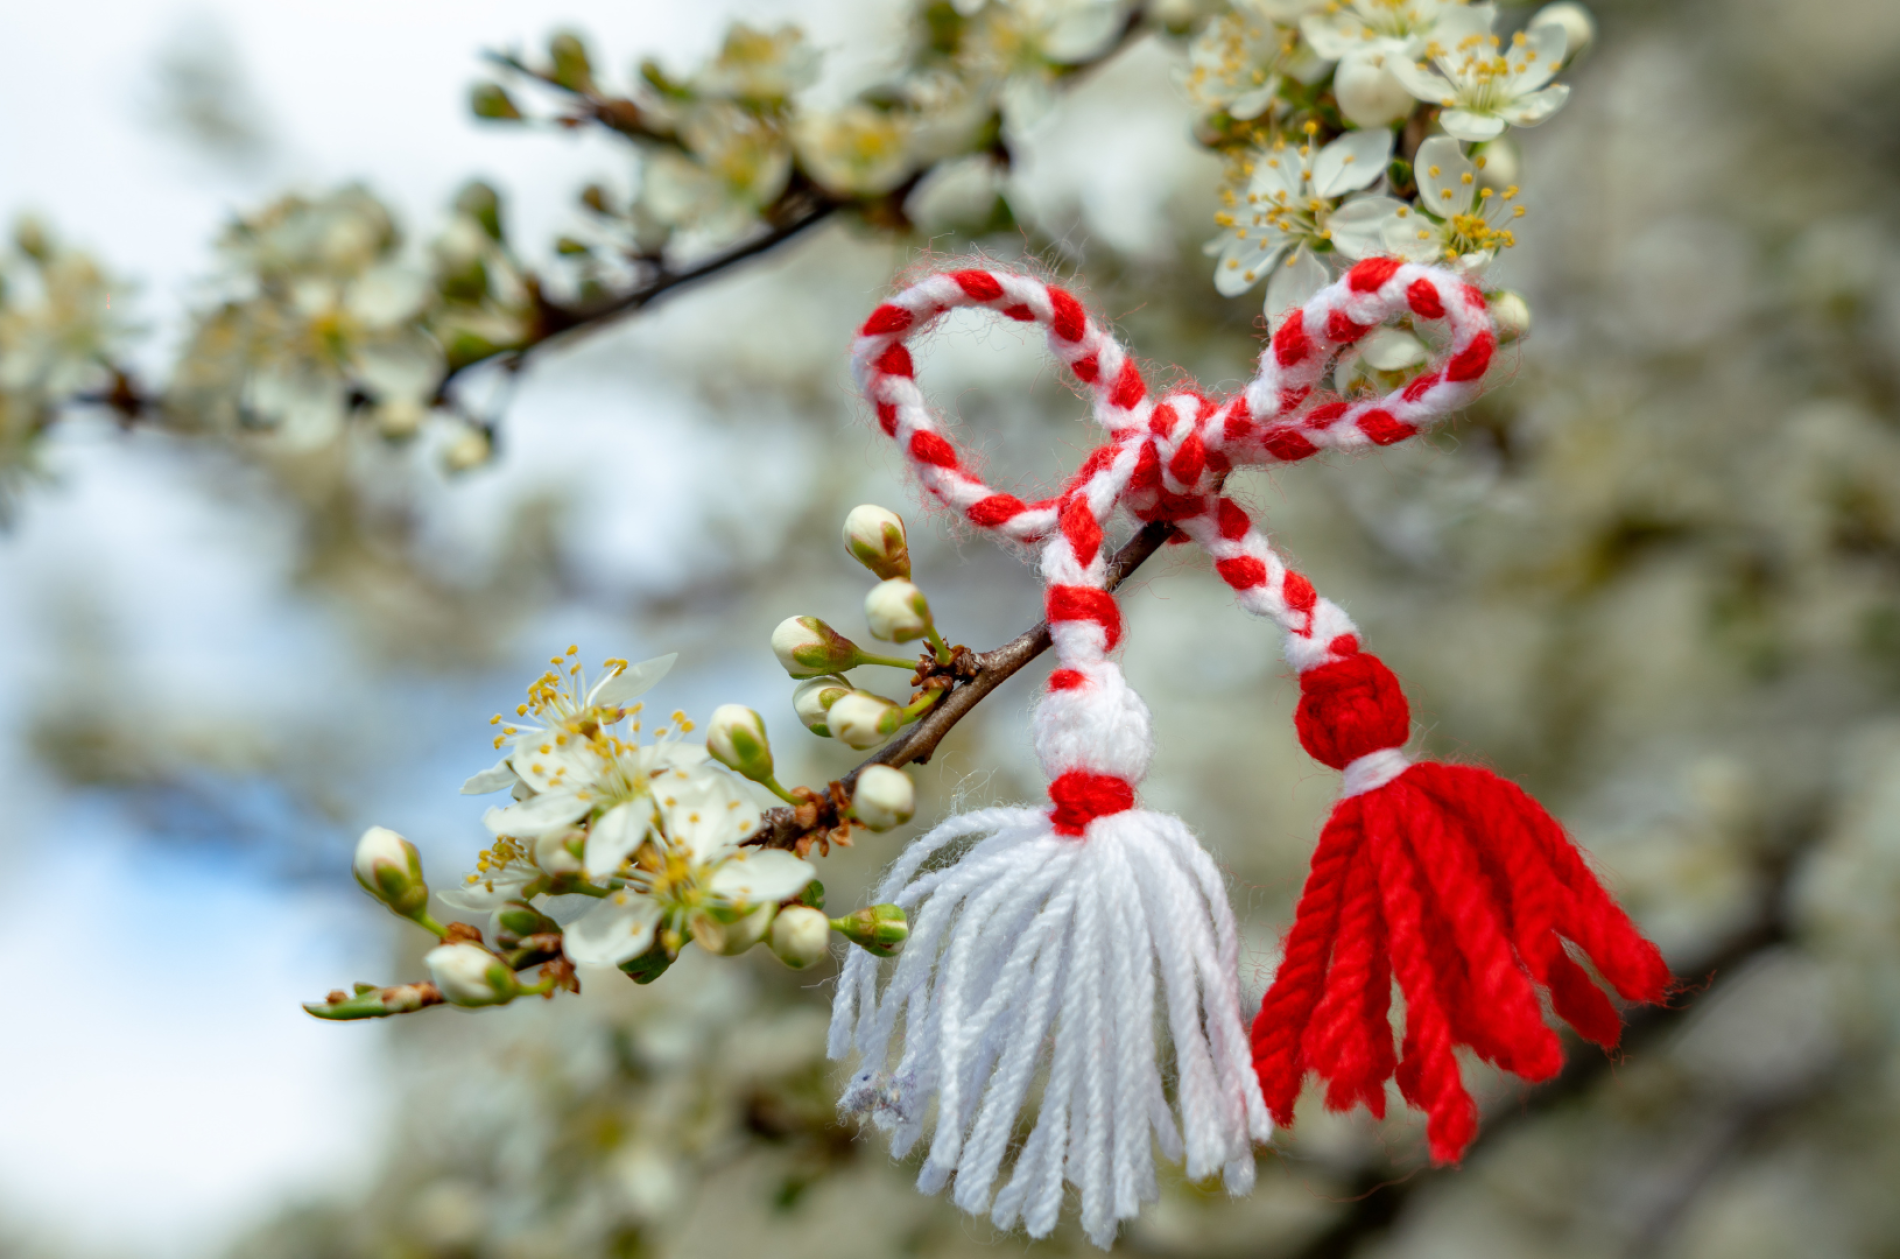 Bulgarian Martenitsa - red and white tasseled bow tied onto a flowering outdoor branch.